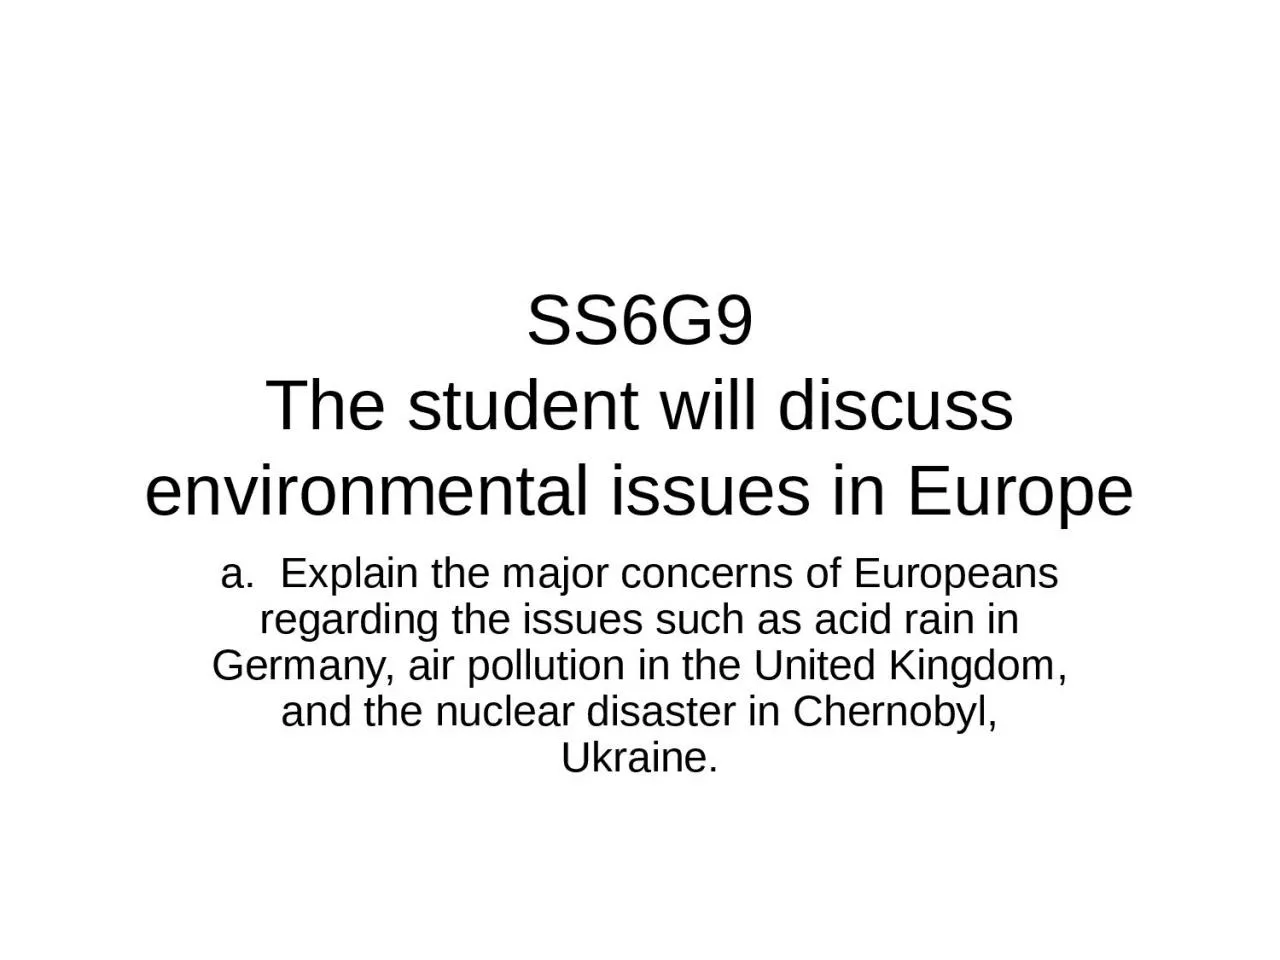 SS6G9 The student will discuss environmental issues in Europe